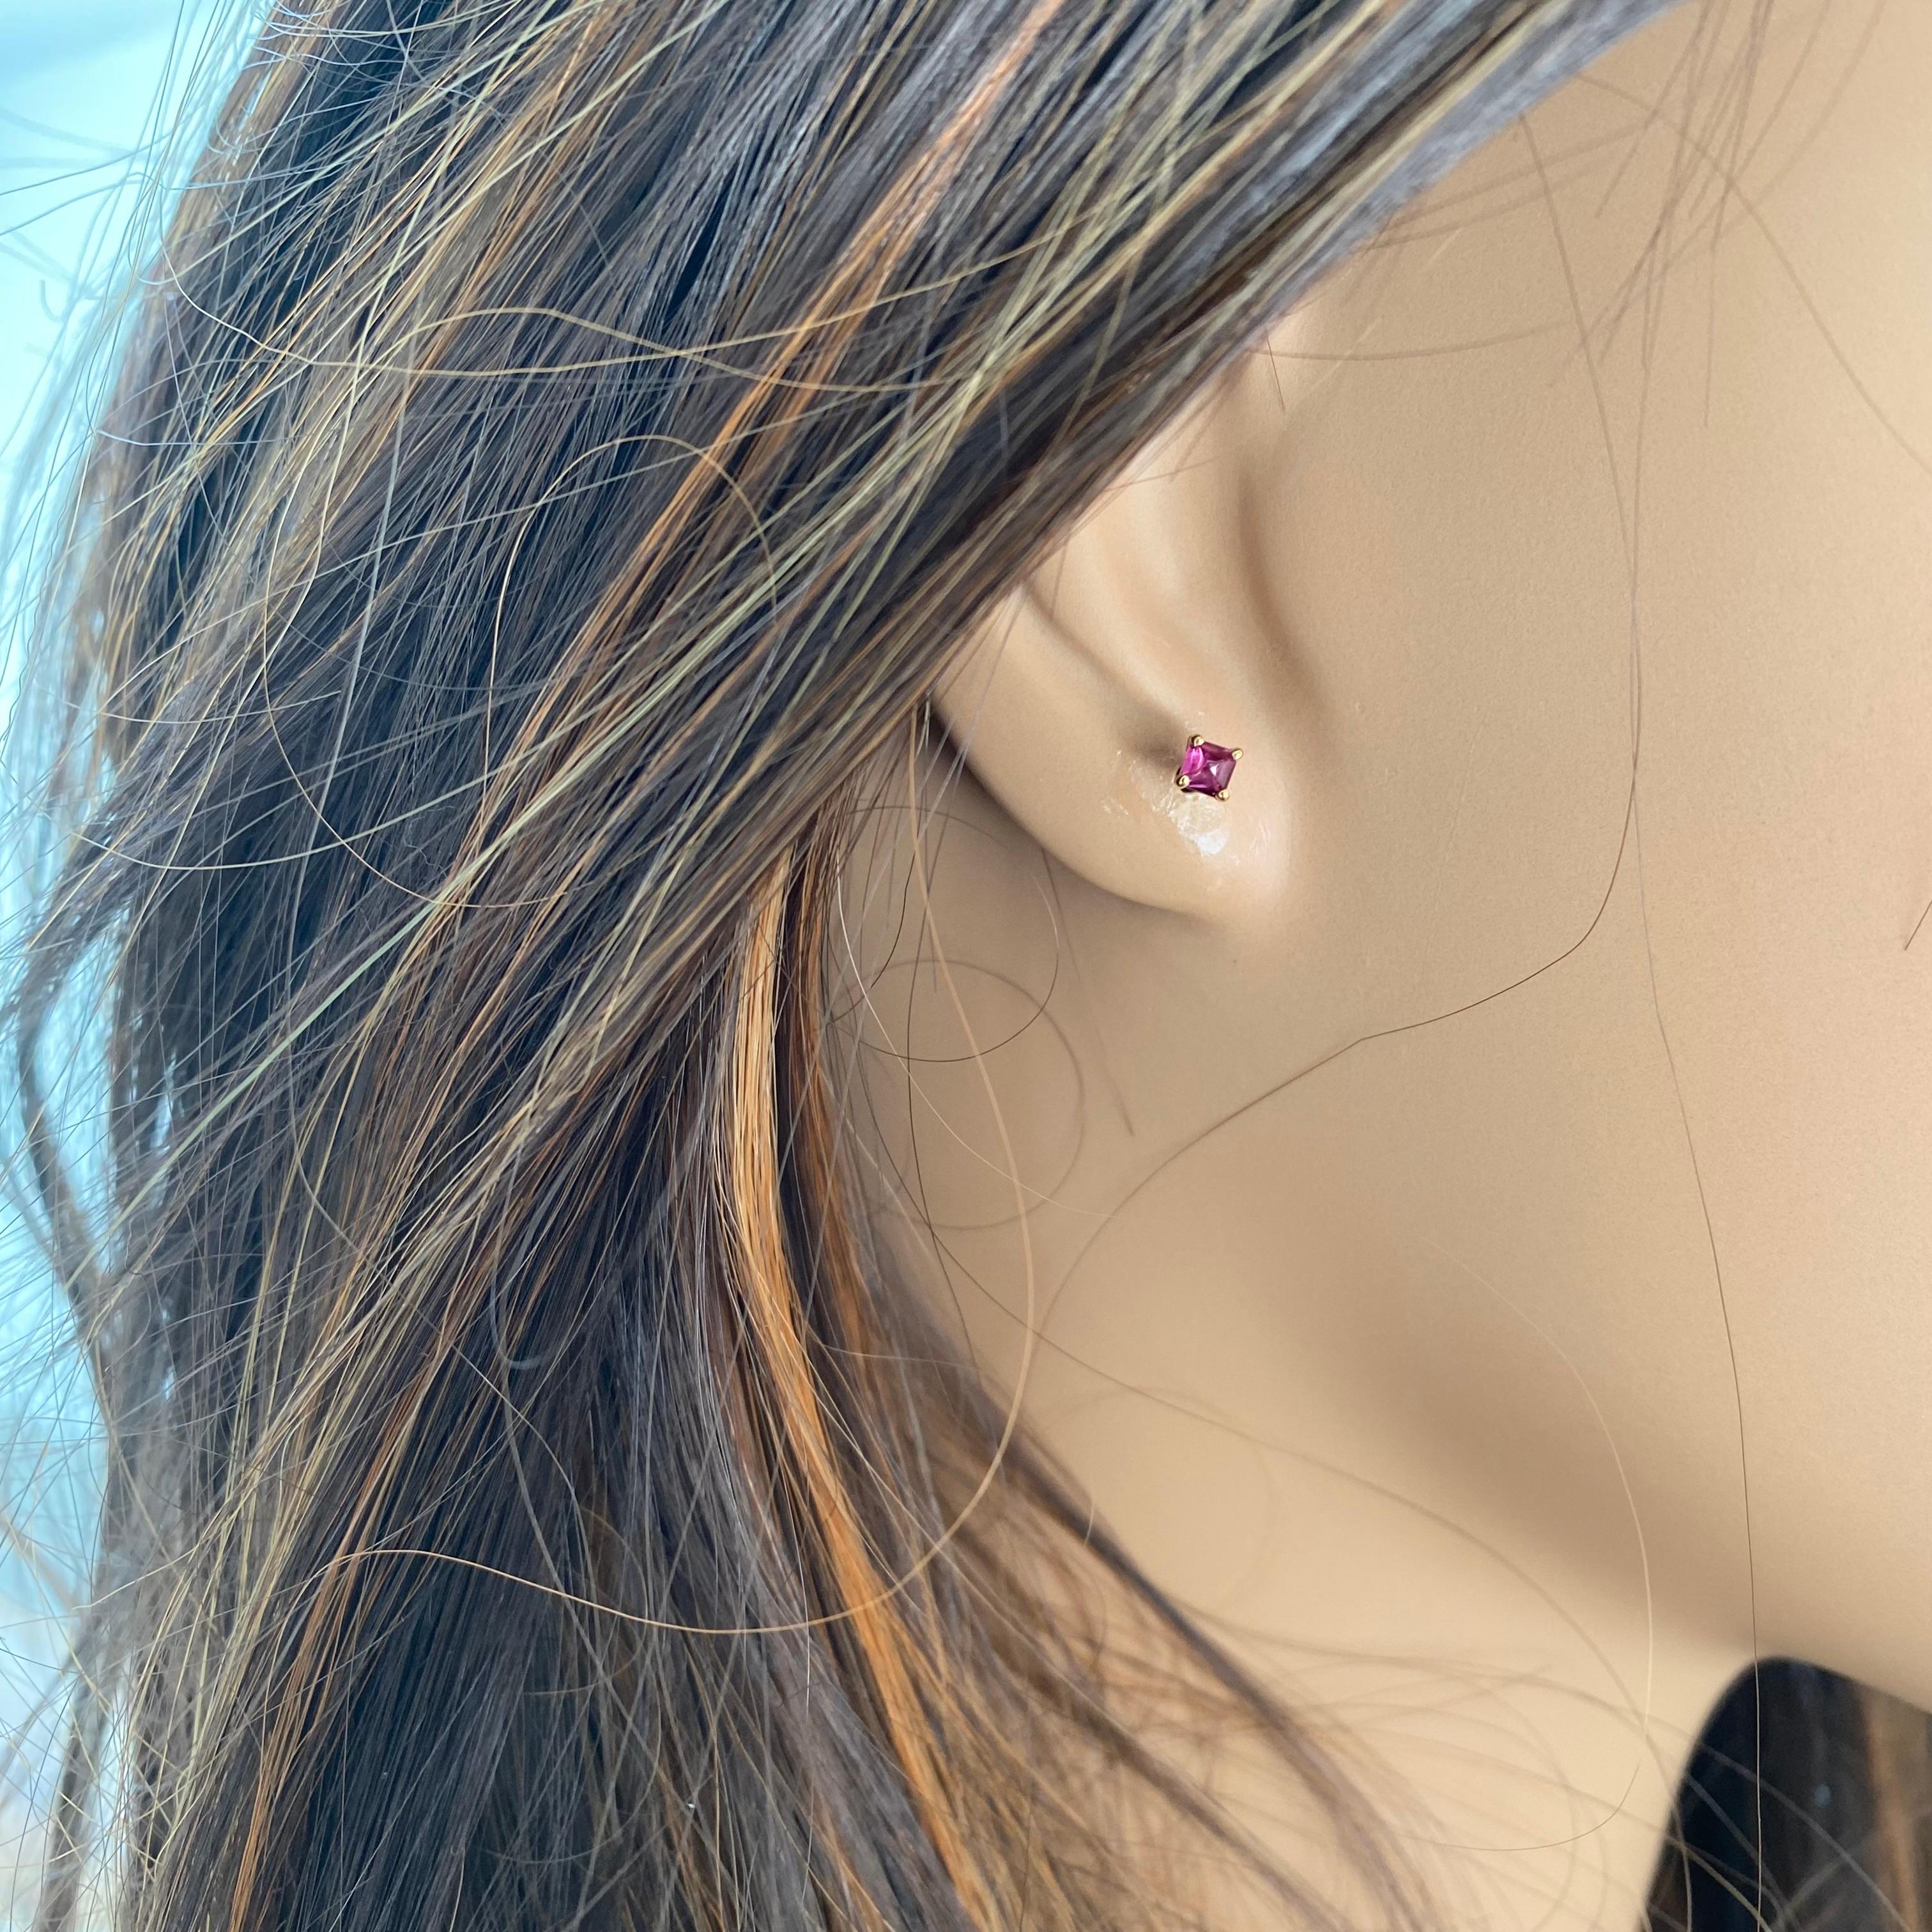 These Sugarloaf Burma Cabochon Ruby stud earrings are a stunning addition to any jewelry collection. Each earring features a vibrant 0.27.5 carat Ruby set in 14 Karat Yellow Gold. The Rubies are elegantly cabochon cut, showcasing their natural